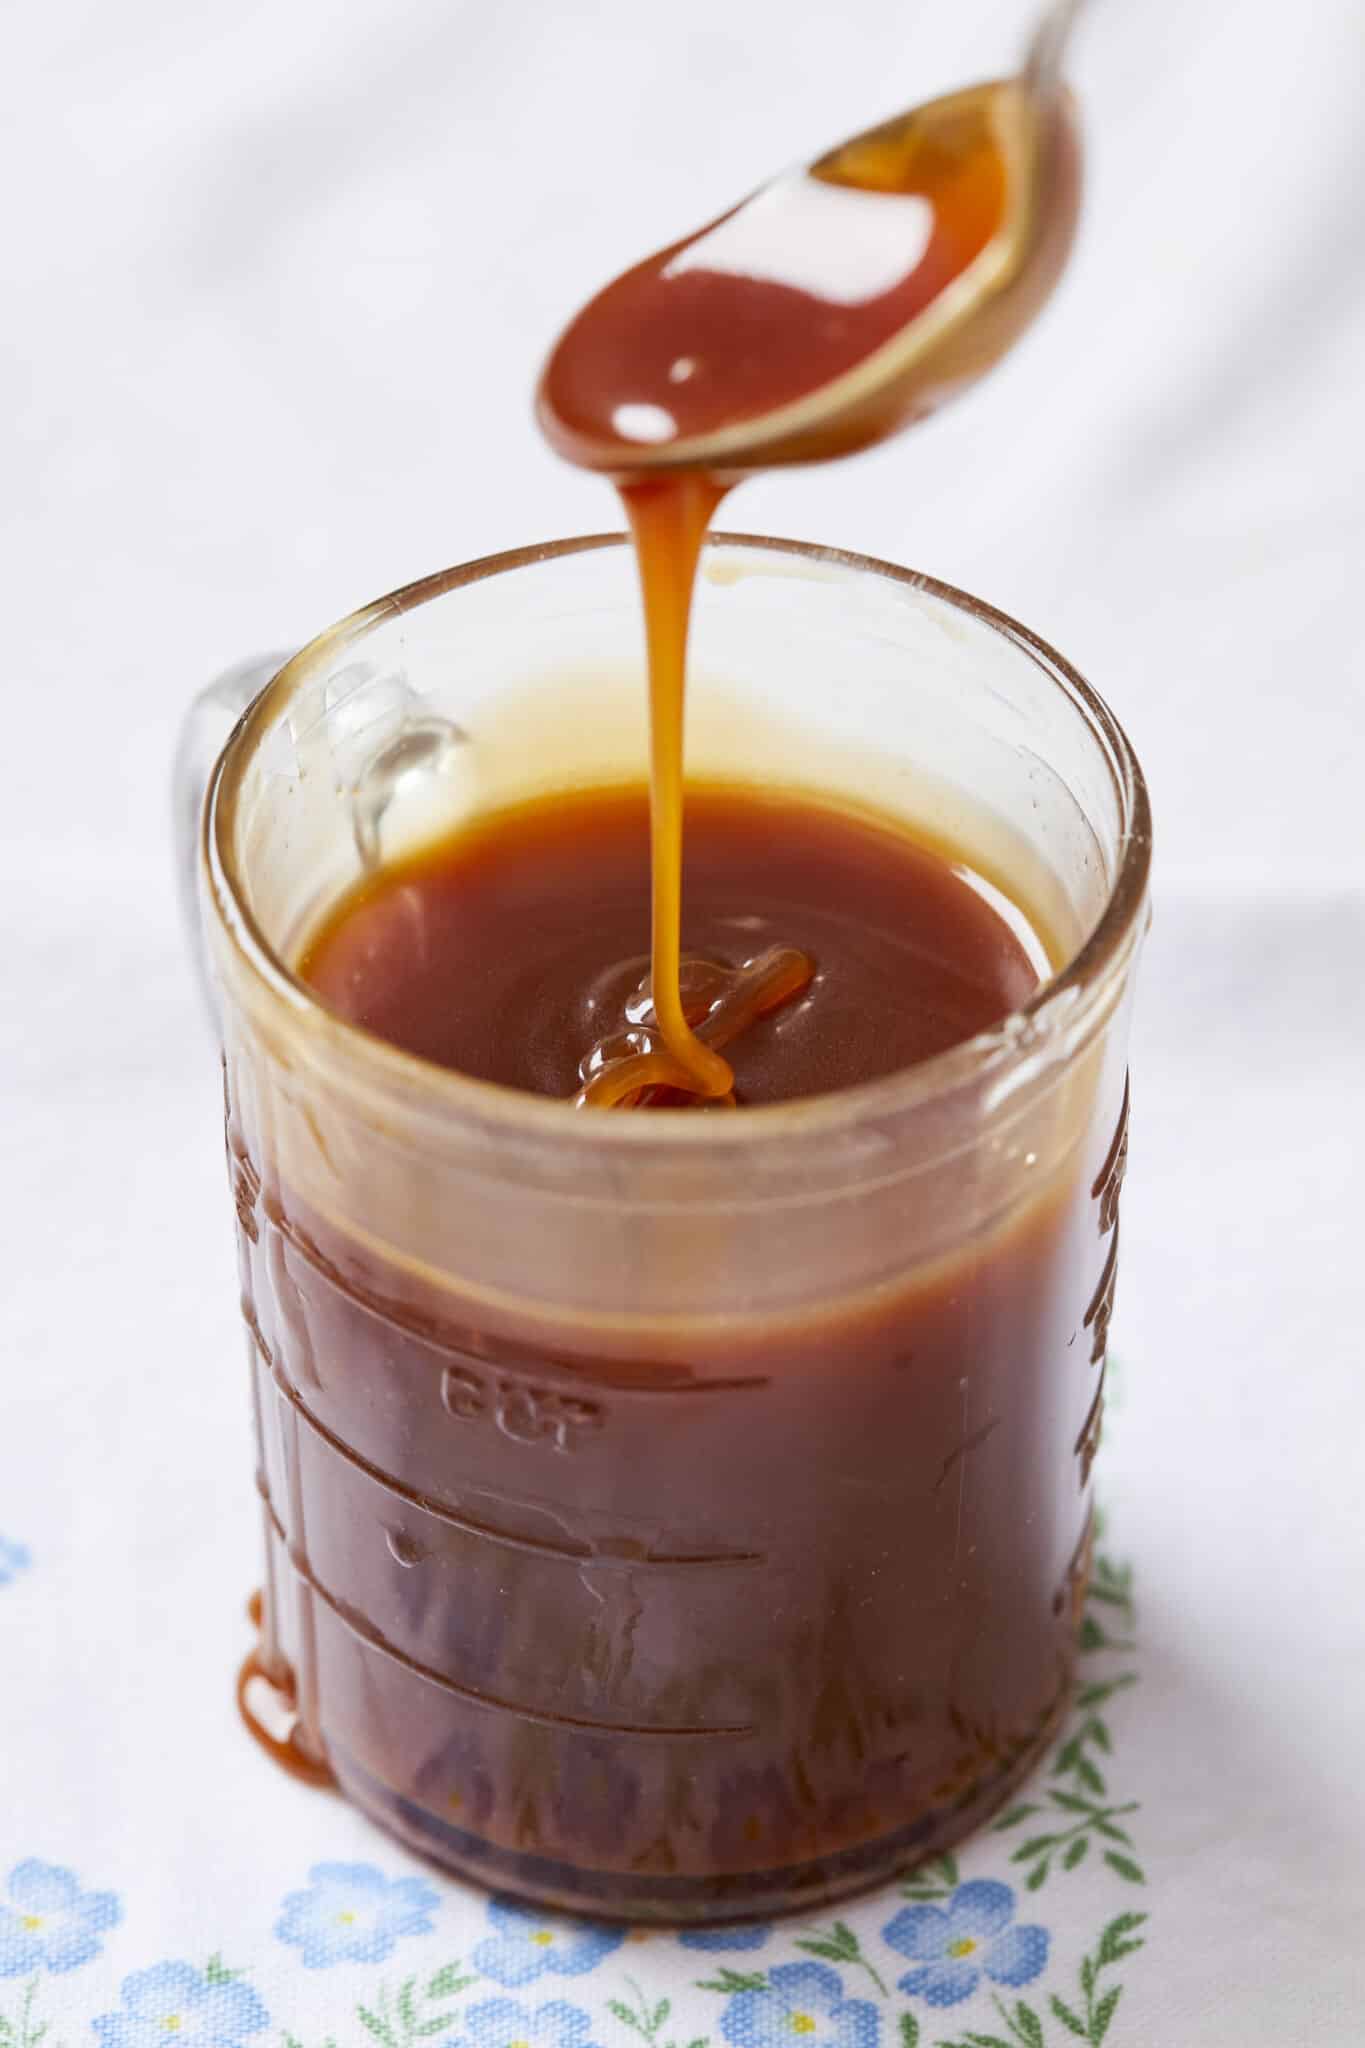 Irish Whiskey Caramel Sauce is in a glass measuring jug. It's in deep amber color and very silky smooth consistency. The whiskey caramel sauce is dripping from a spoon above the jug back in.